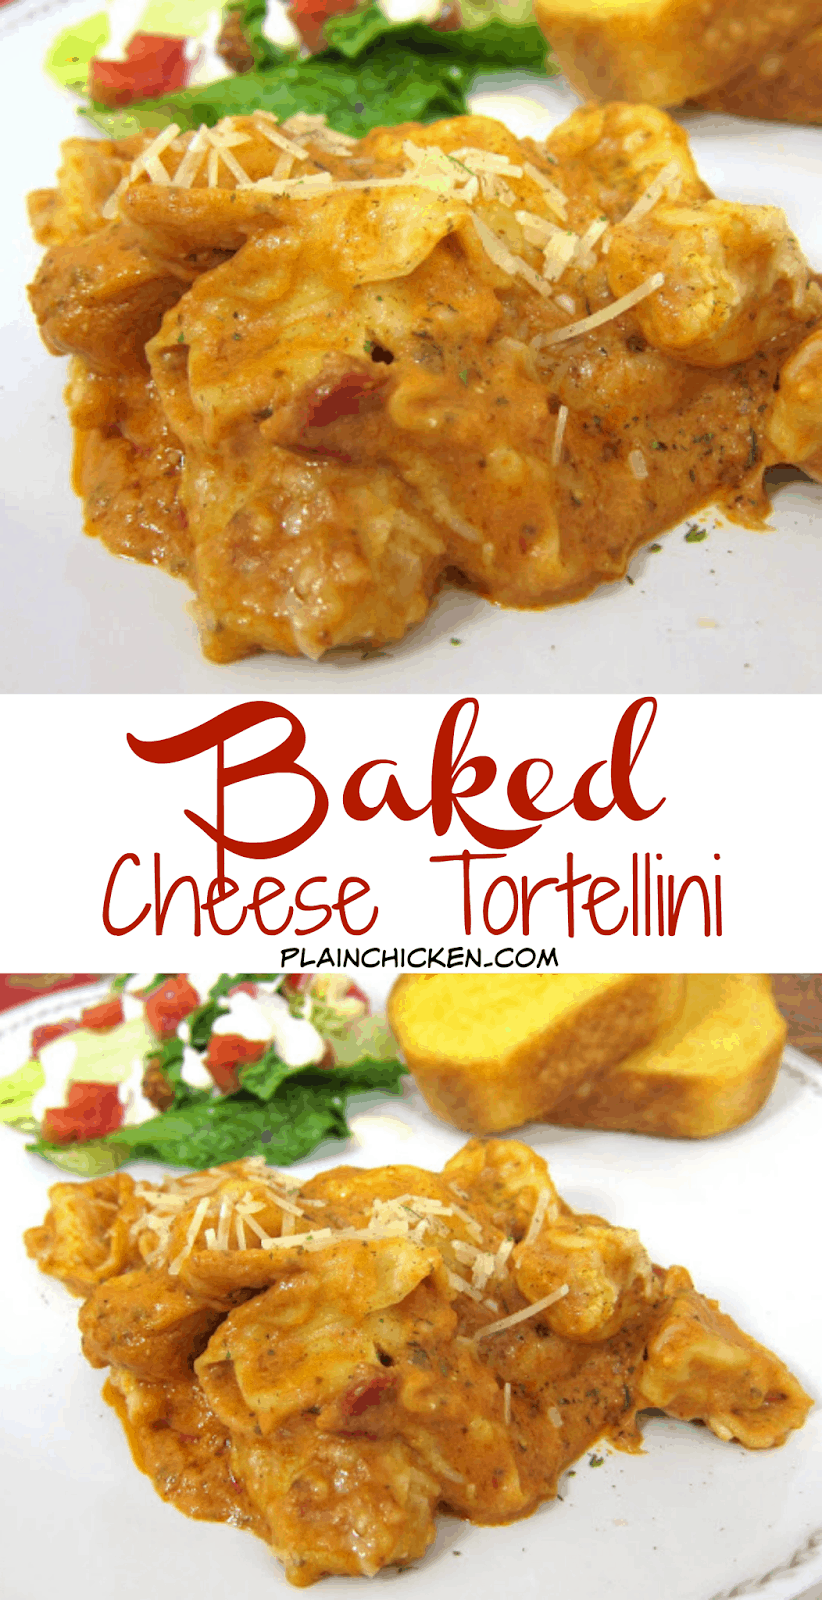 Baked Cheese Tortellini recipe - refrigerated cheese tortellini baked in a mixture of spaghetti sauce, cream cheese, milk, parmesan and mozzarella cheese. Ready in 20 minutes! SUPER quick weeknight pasta recipe! Can add meat to the sauce.